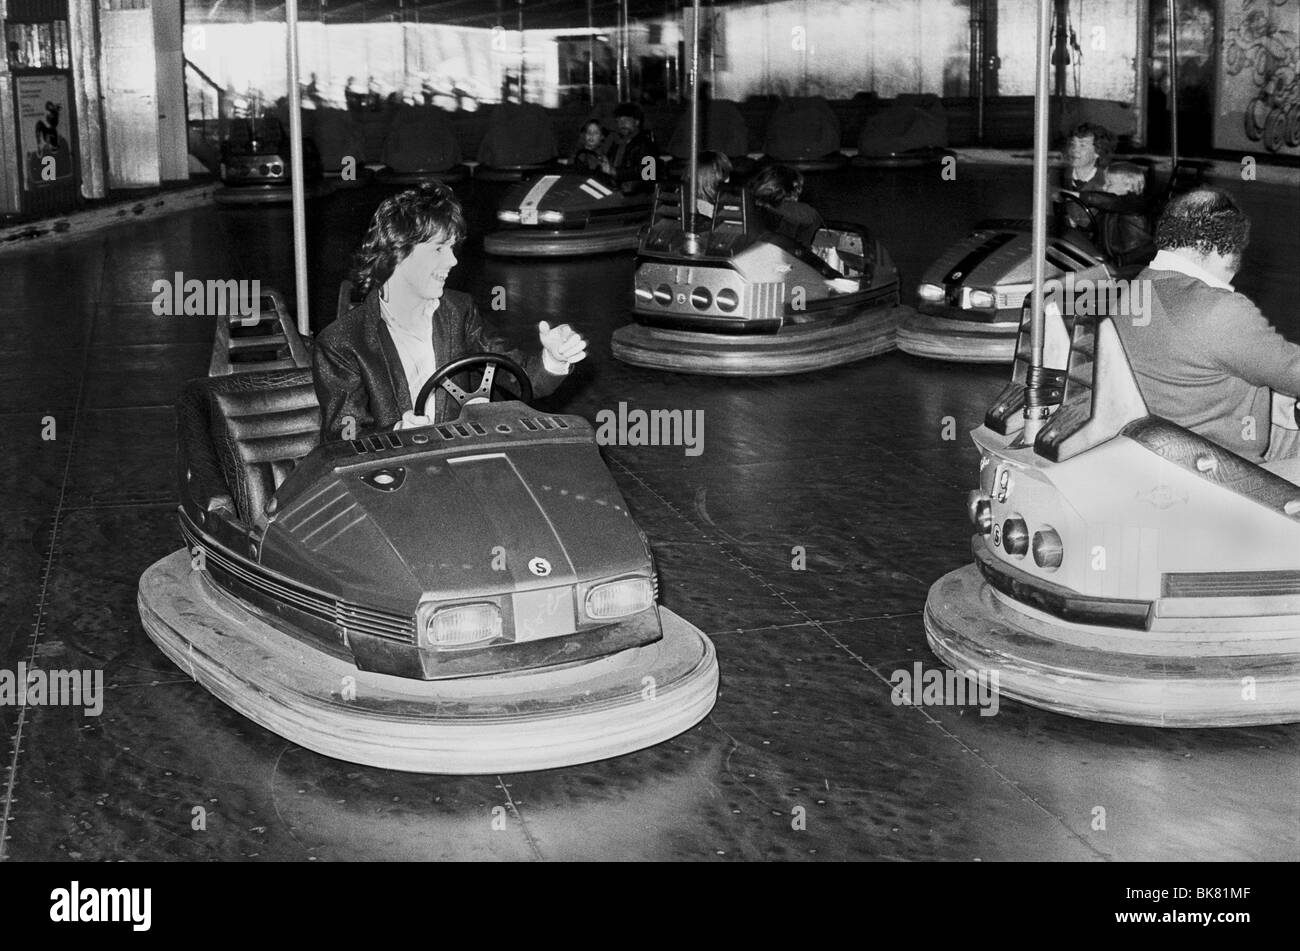 Gary Moore in a electric bumper car at the amusement park Tivoli in Copenhagen during rock band Thin Lizzy tour of Scandinavia Stock Photo